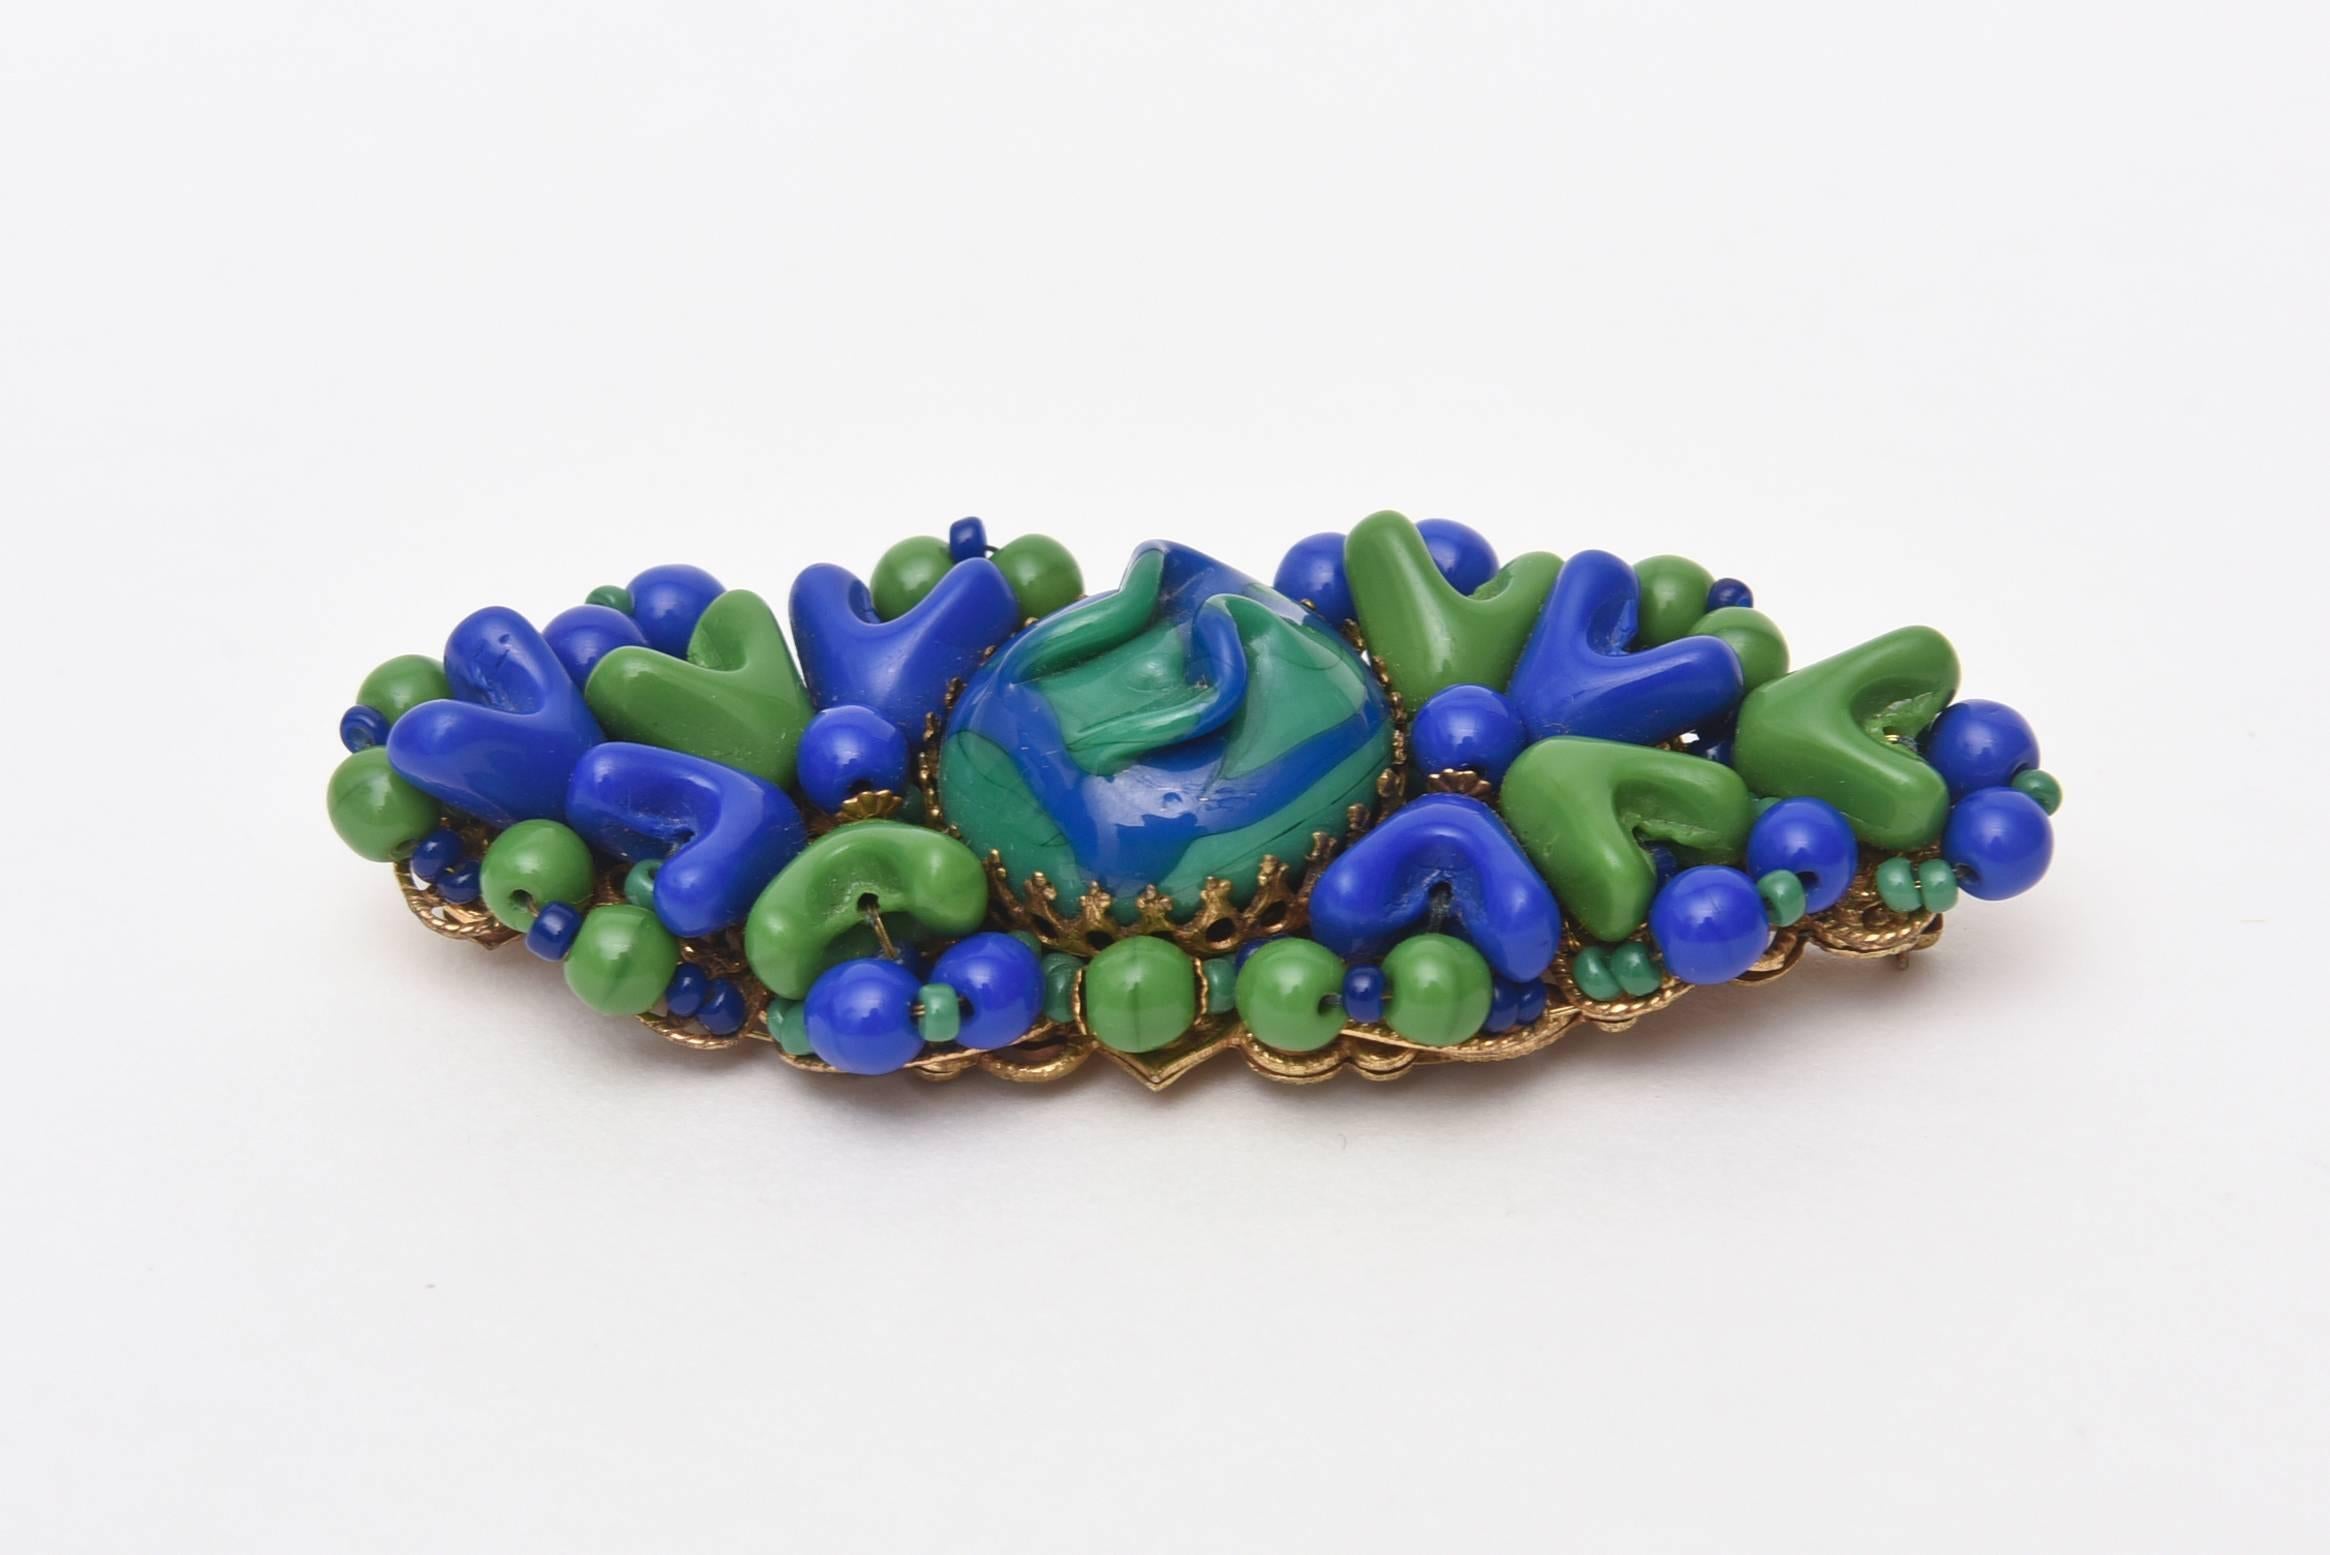 Women's  MIriam Haskell Abstract Resin Royal Blue and Green Bead Brooch Pin Vintage For Sale